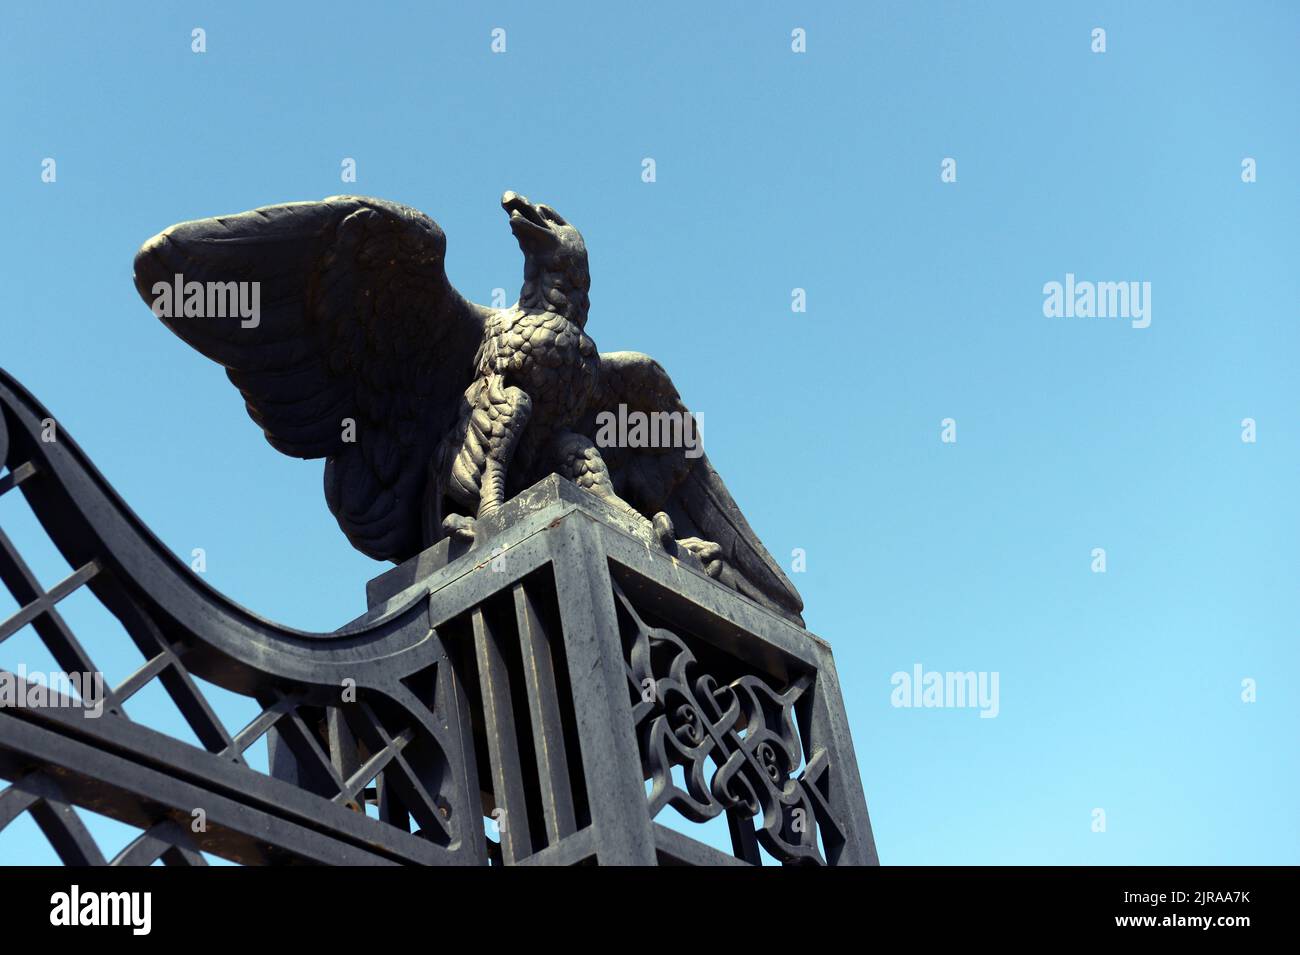 Decorative eagle sculpture on the gate of the upper entrance to the Bahai Garden in Haifa, Israel. Stock Photo